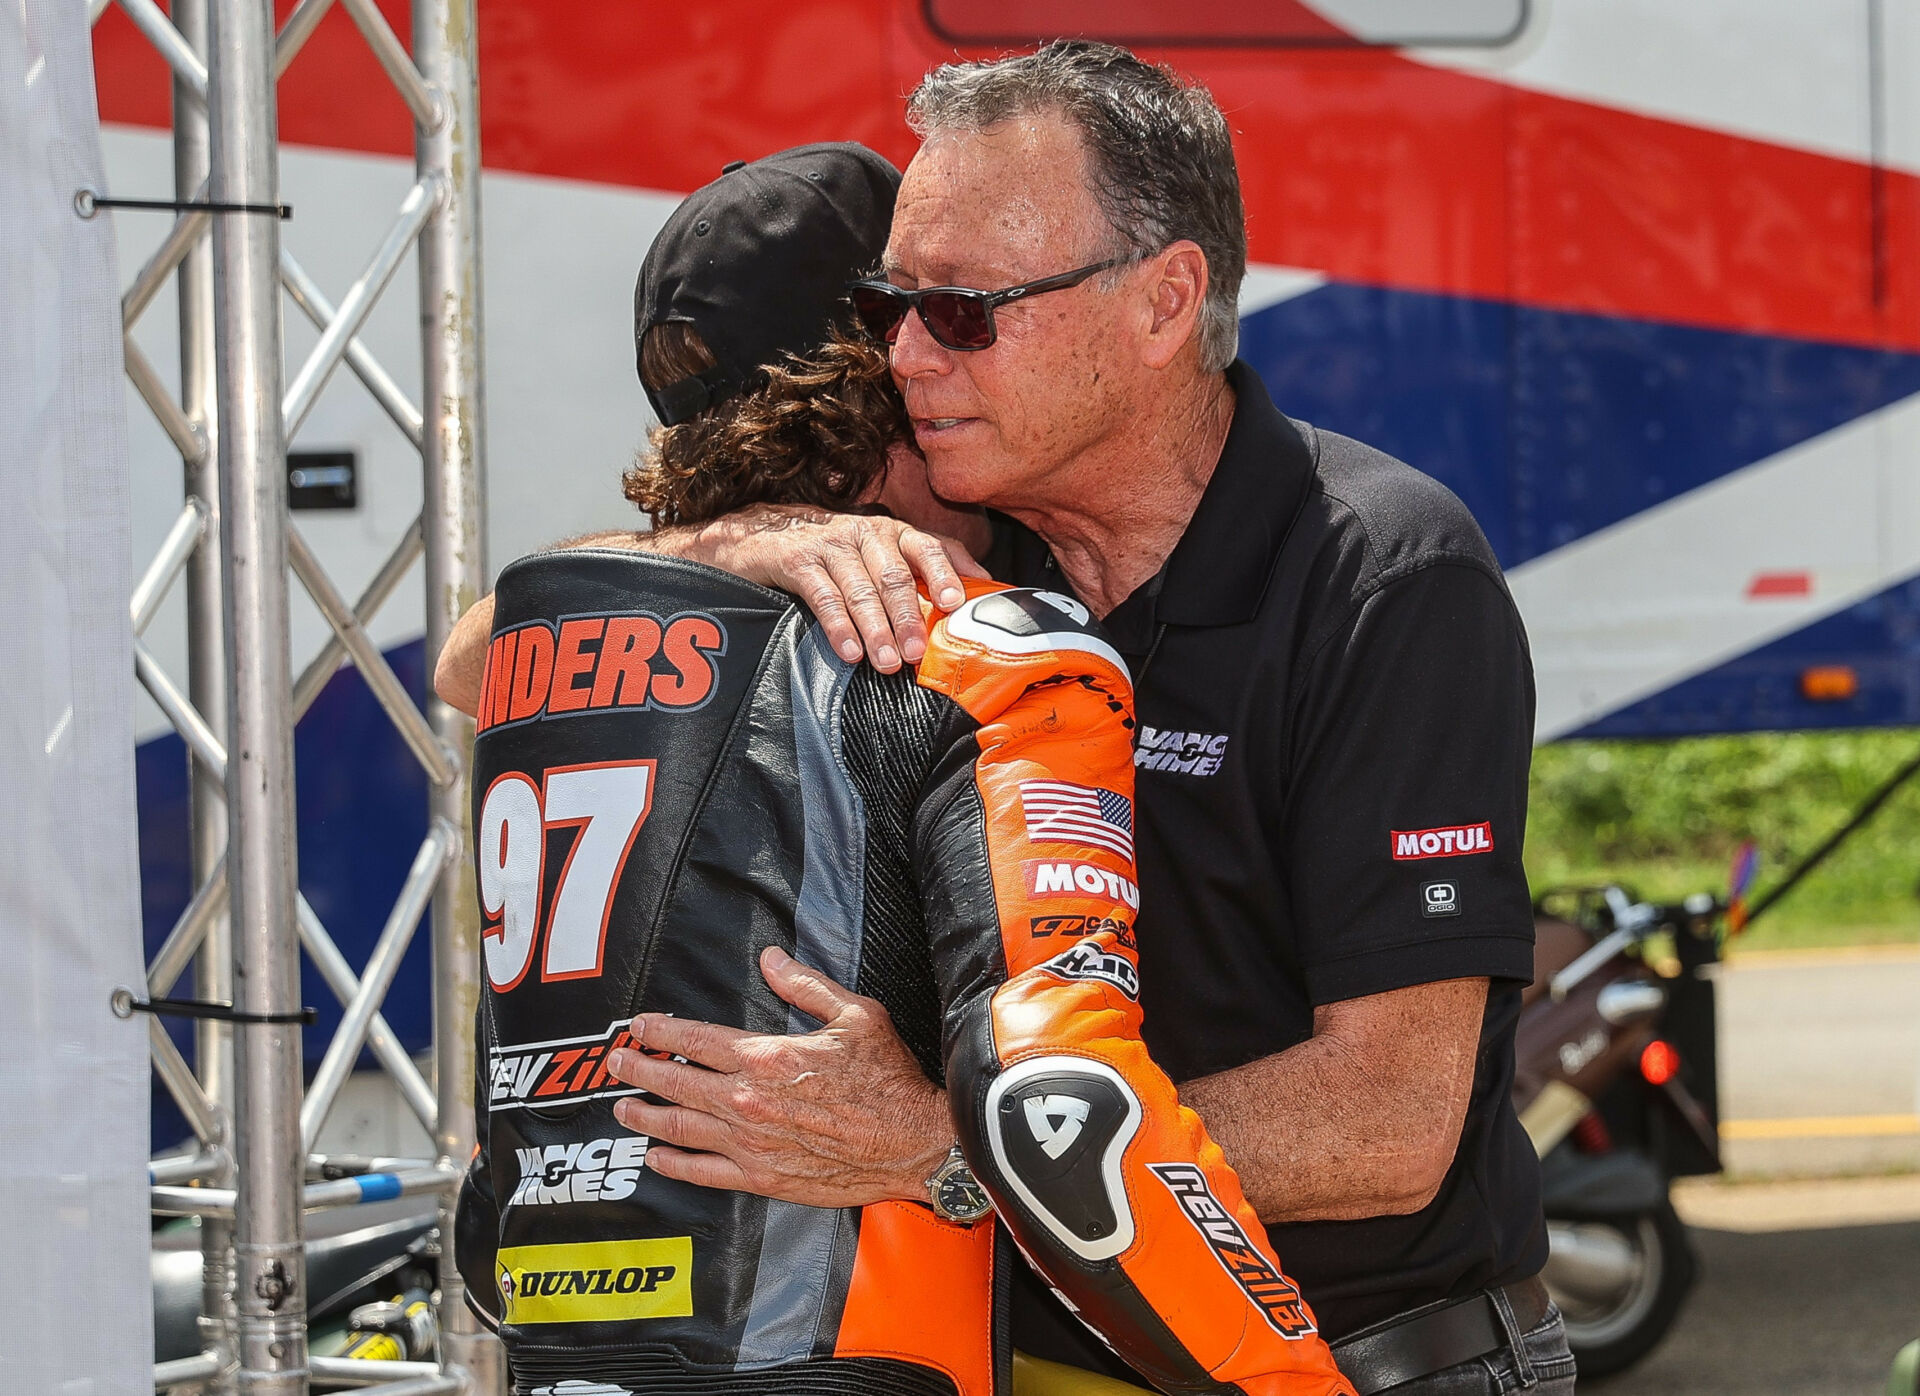 RevZilla/Motul/Vance & Hines team owner Terry Vance is set to donate $125,000 to the 